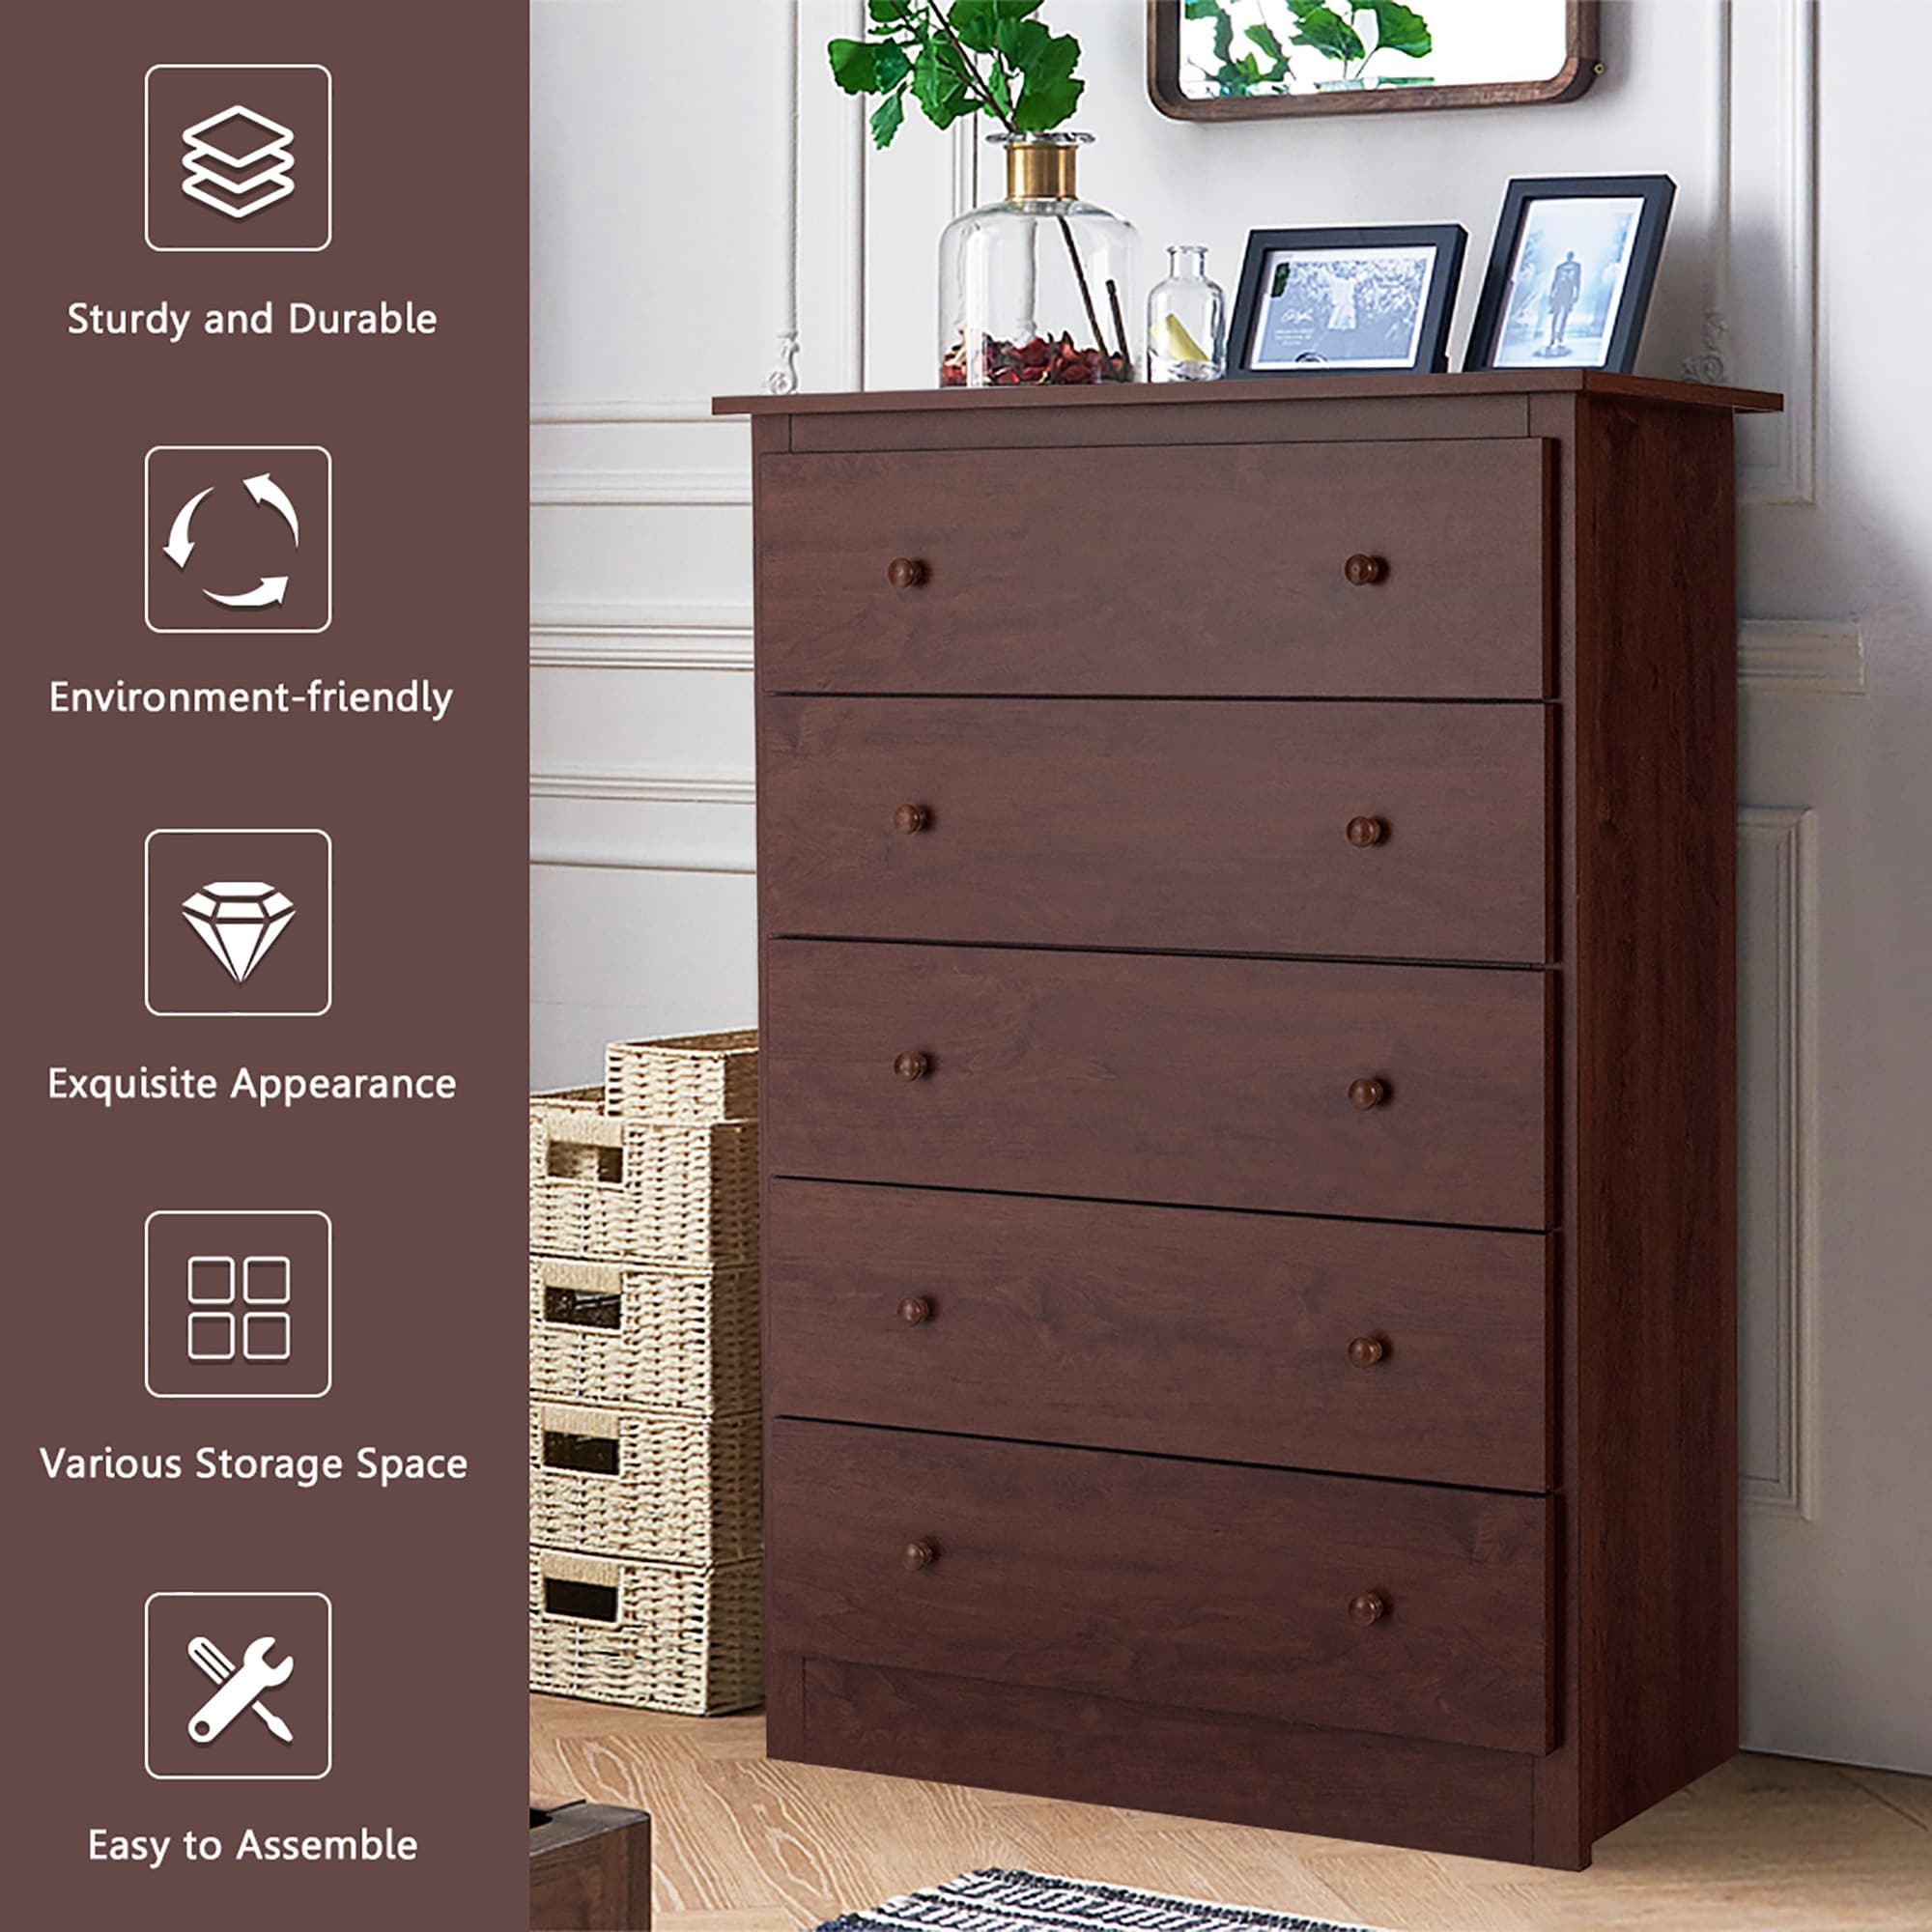 https://ak1.ostkcdn.com/images/products/is/images/direct/288b63b0941cff362b9e0d140a4afaebeb1bc840/5-Drawer-Storage-Chest-Wooden-Clothes-Organizer-for-Home-and-Office.jpg